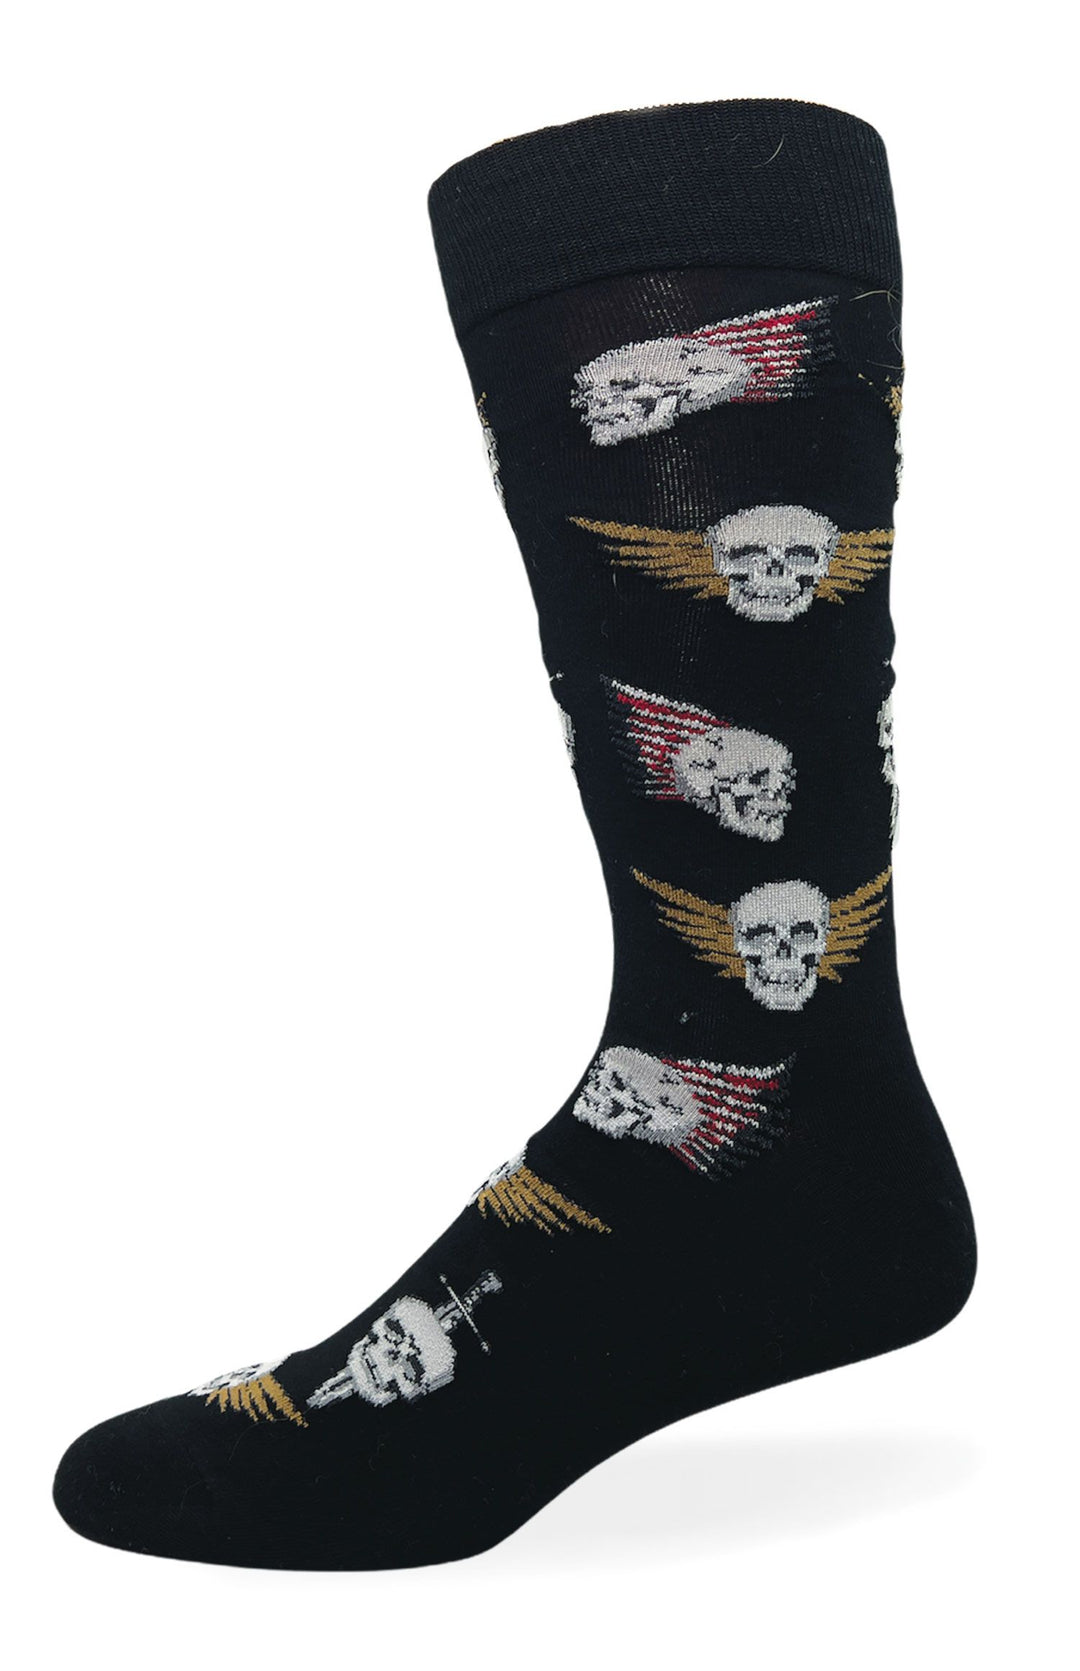 "Skull" Pattern Cotton Dress Sock by Crazy Toes -Large